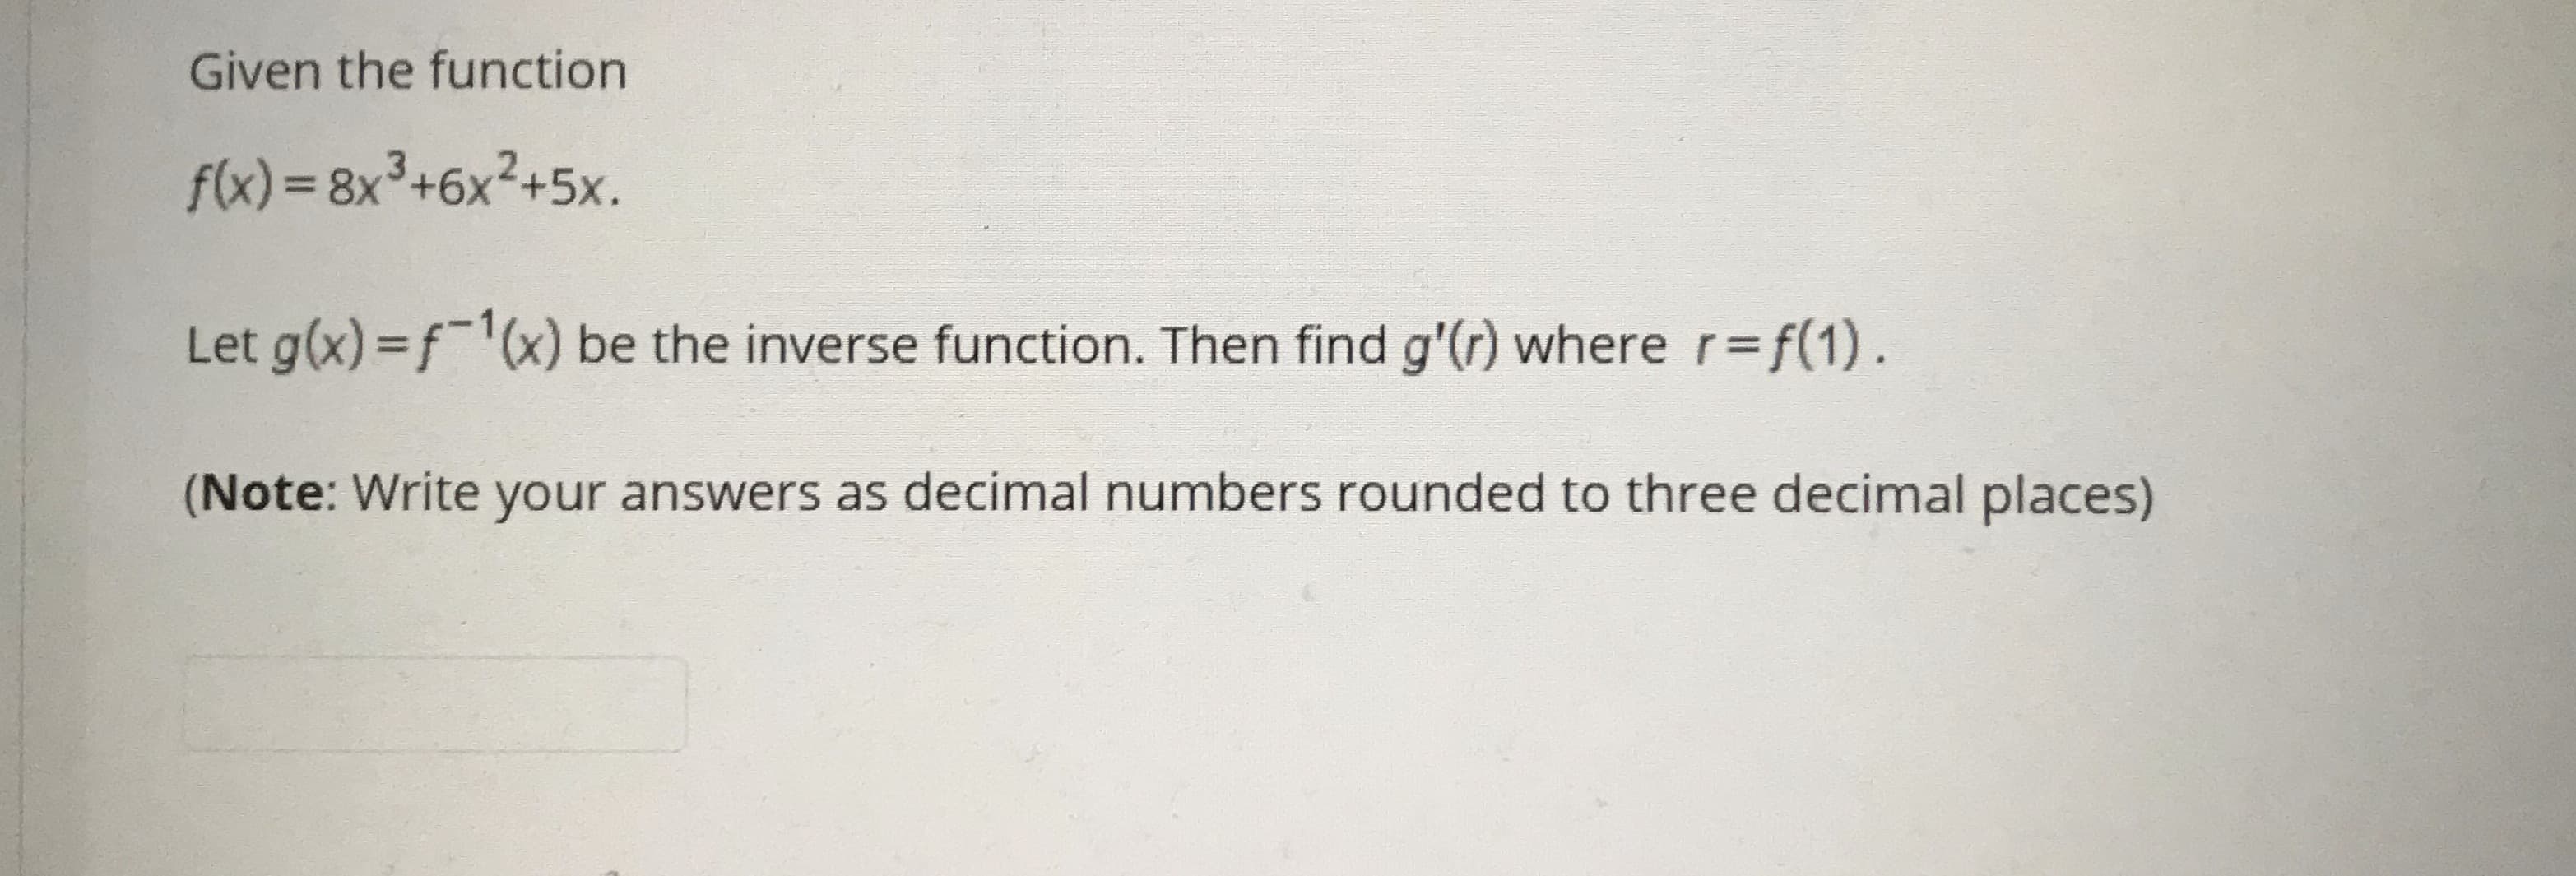 Given the function
f(x) = 8x³+6x²+5x.
Let g(x) =f(x) be the inverse function. Then find g'(r) where r=f(1).
(Note: Write your answers as decimal numbers rounded to three decimal places)
